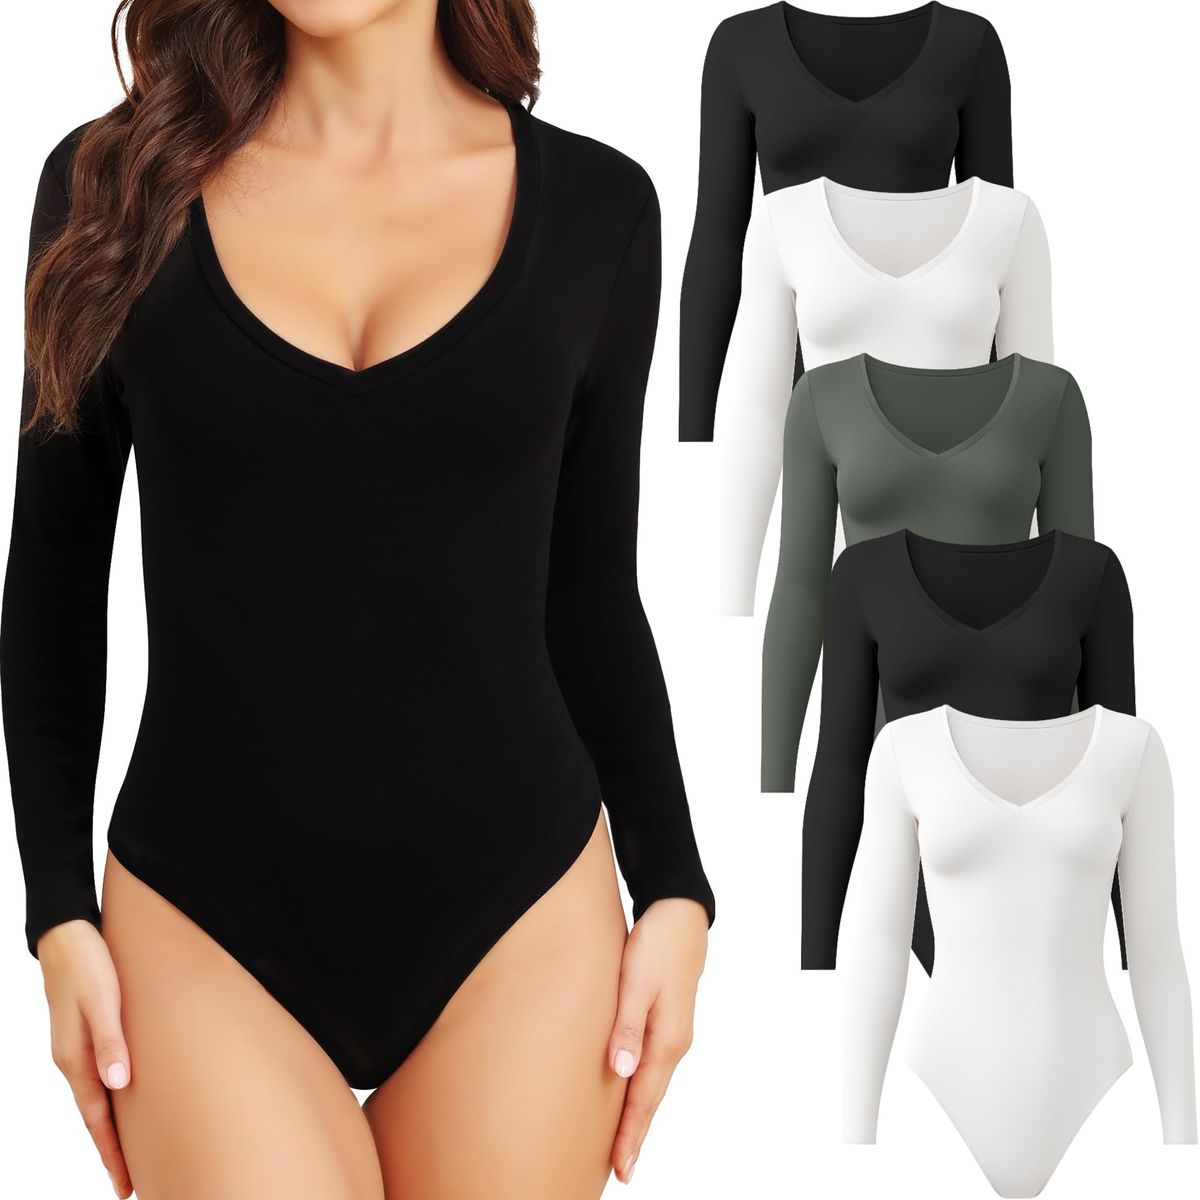 BALENNZ Womens Long Sleeve Bodysuit Round Neck Bodysuit Shirts for Women  Crew Neck Body Suits Tops Fall Body Suit Pack